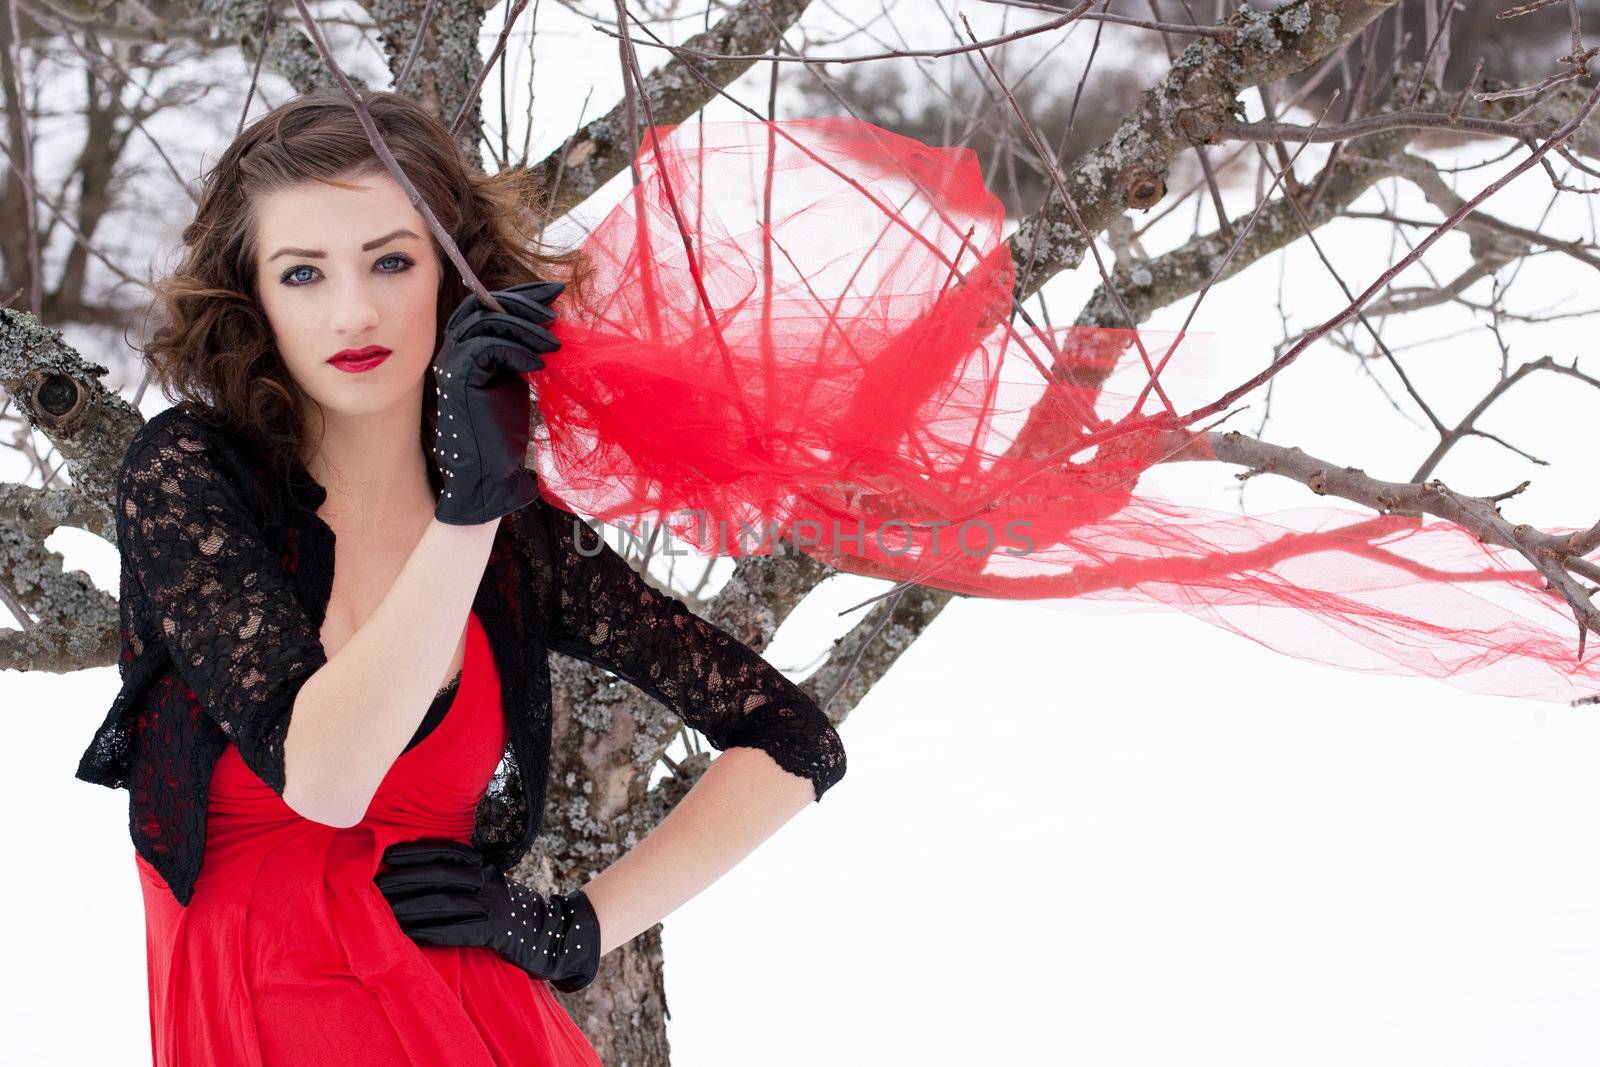 Beautiful woman with dark hair and red lips in white snow